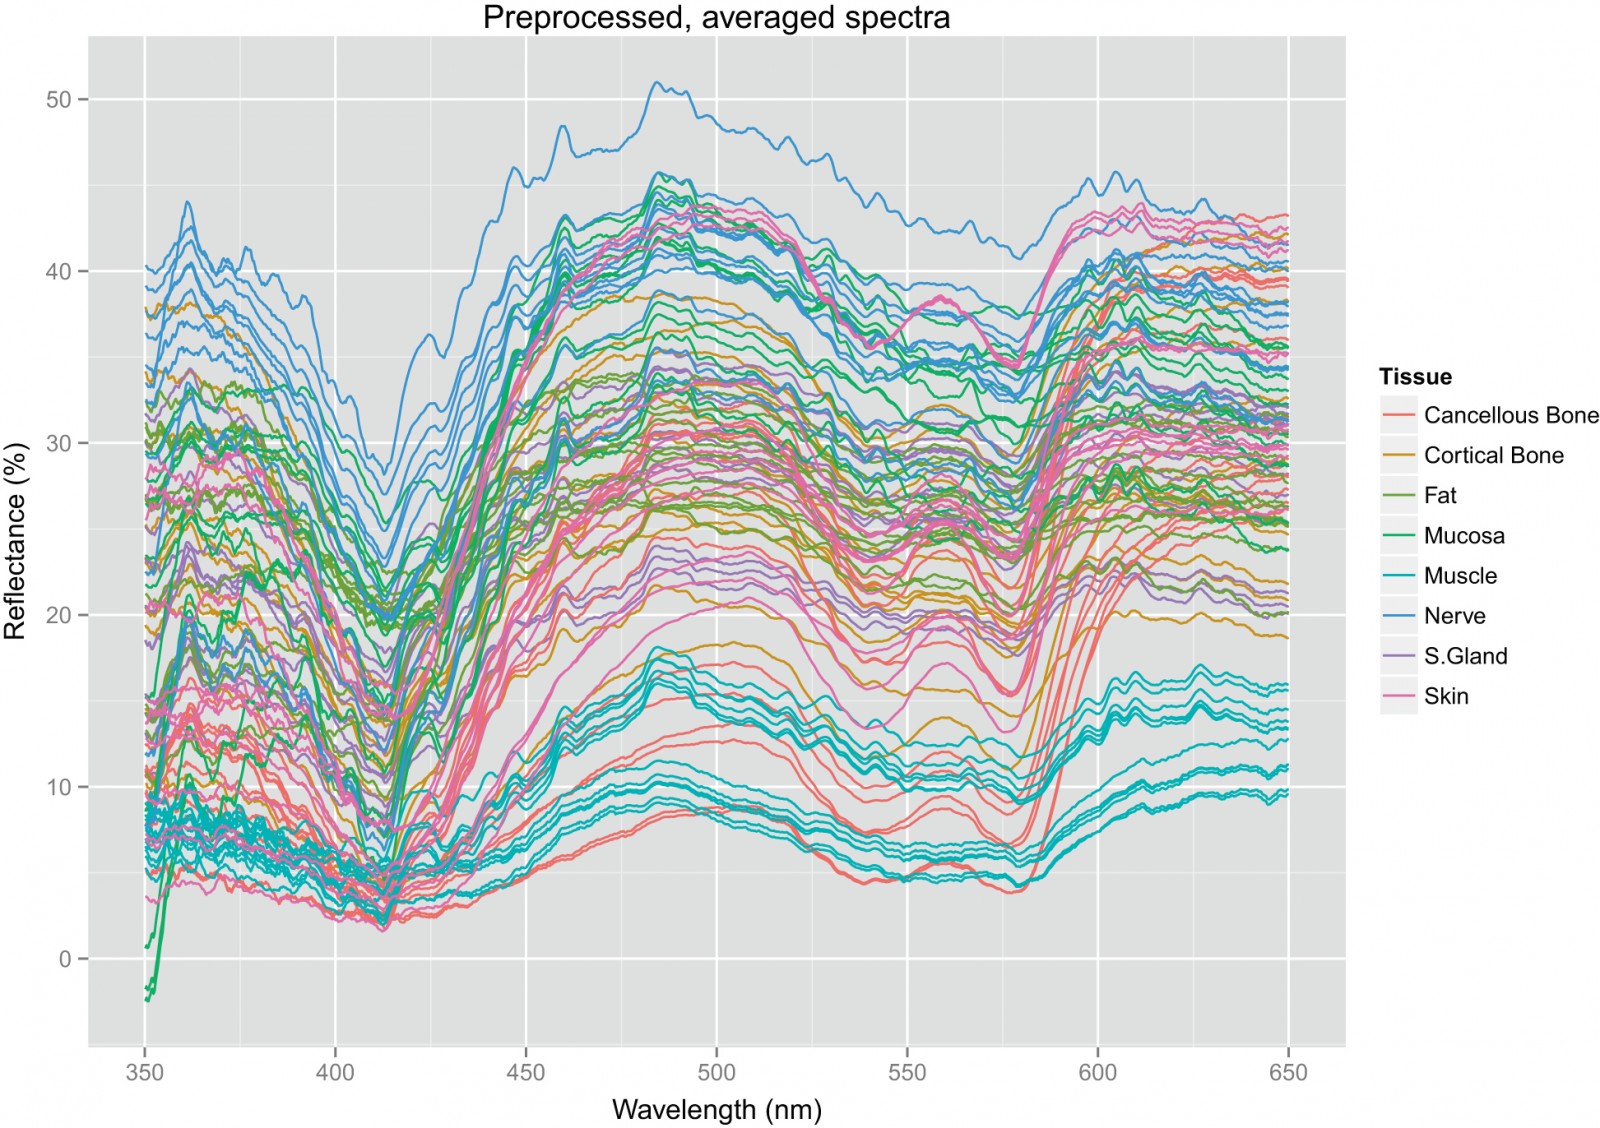 Figure 2. The 96 spectra of 8 tissue types from 12 different animals (Engelhardt et al. 2014)